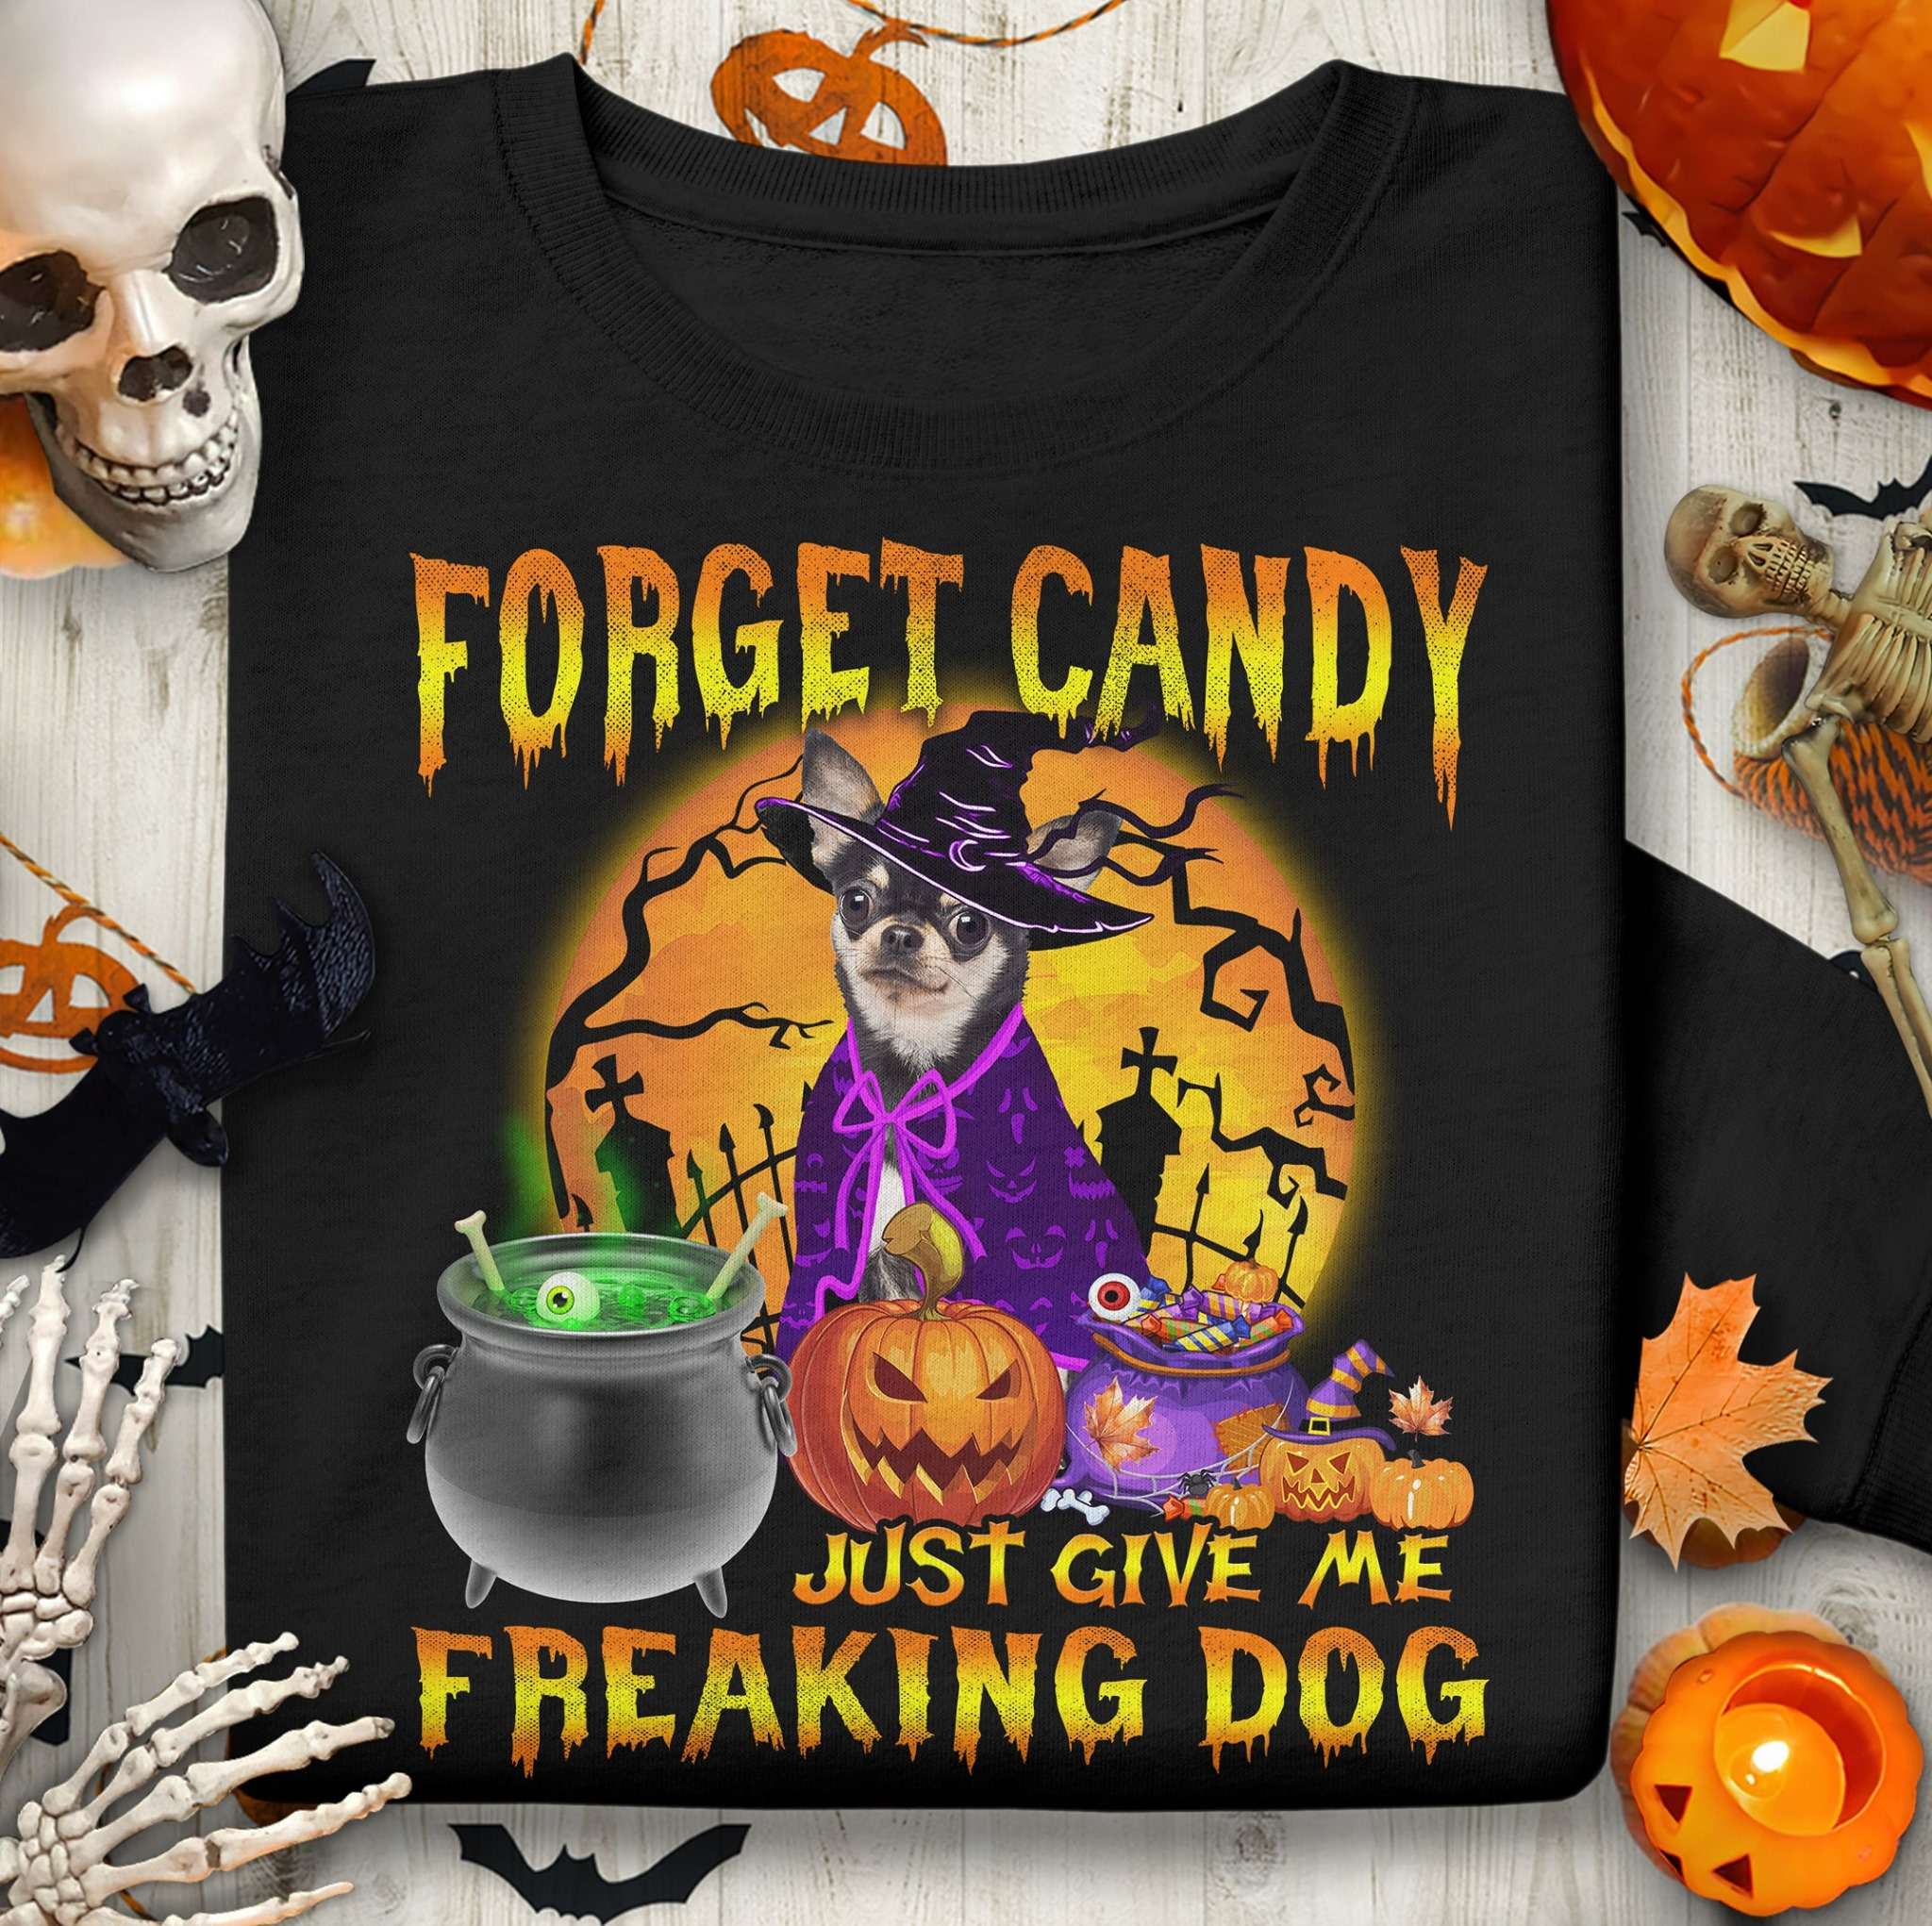 Forget candy, just give me freaking dog - Chihuahua witch halloween, gift for Halloween day